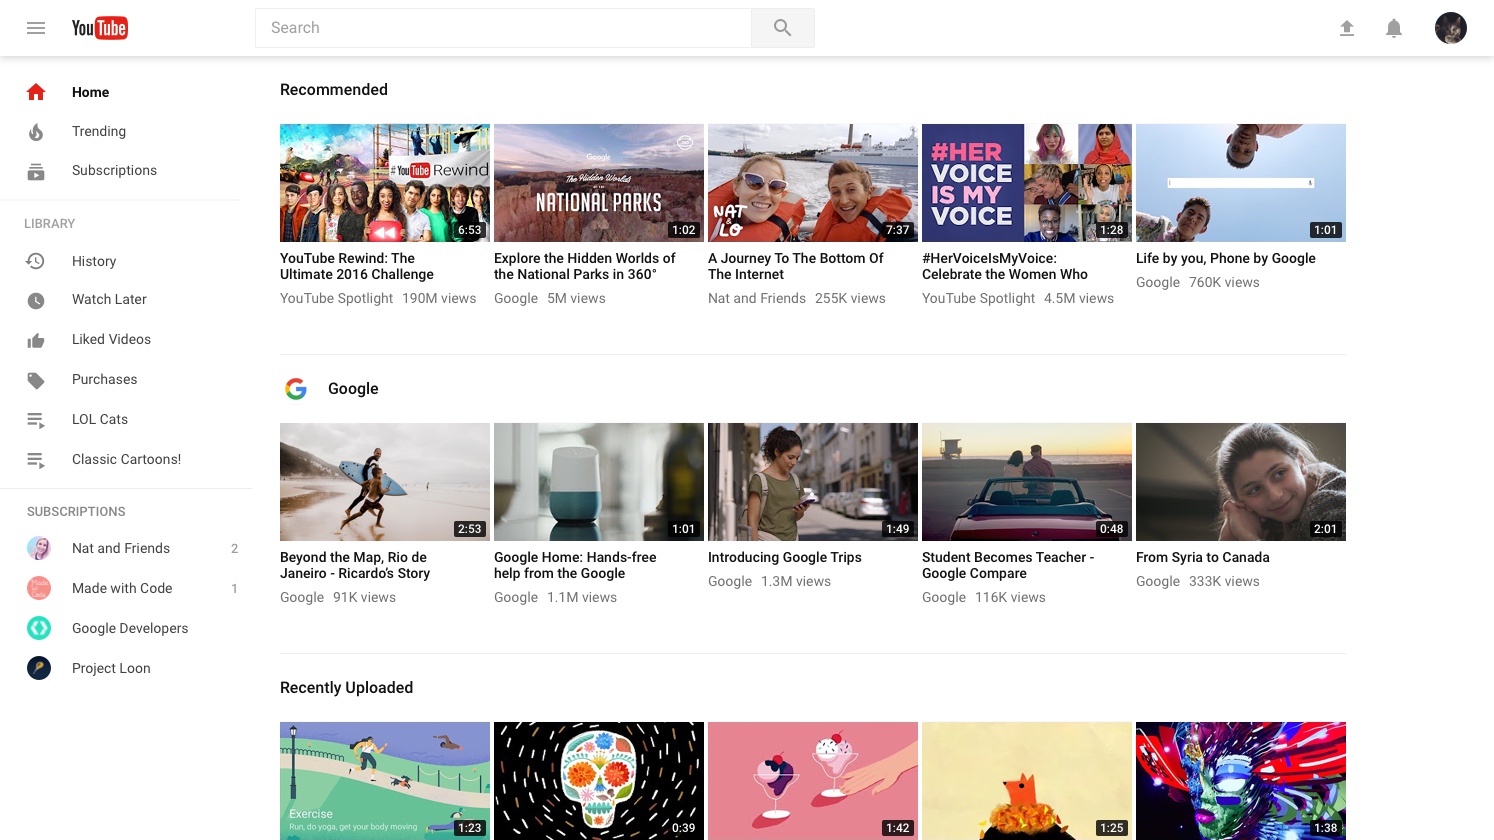 YouTube homepage after redesign (2017)